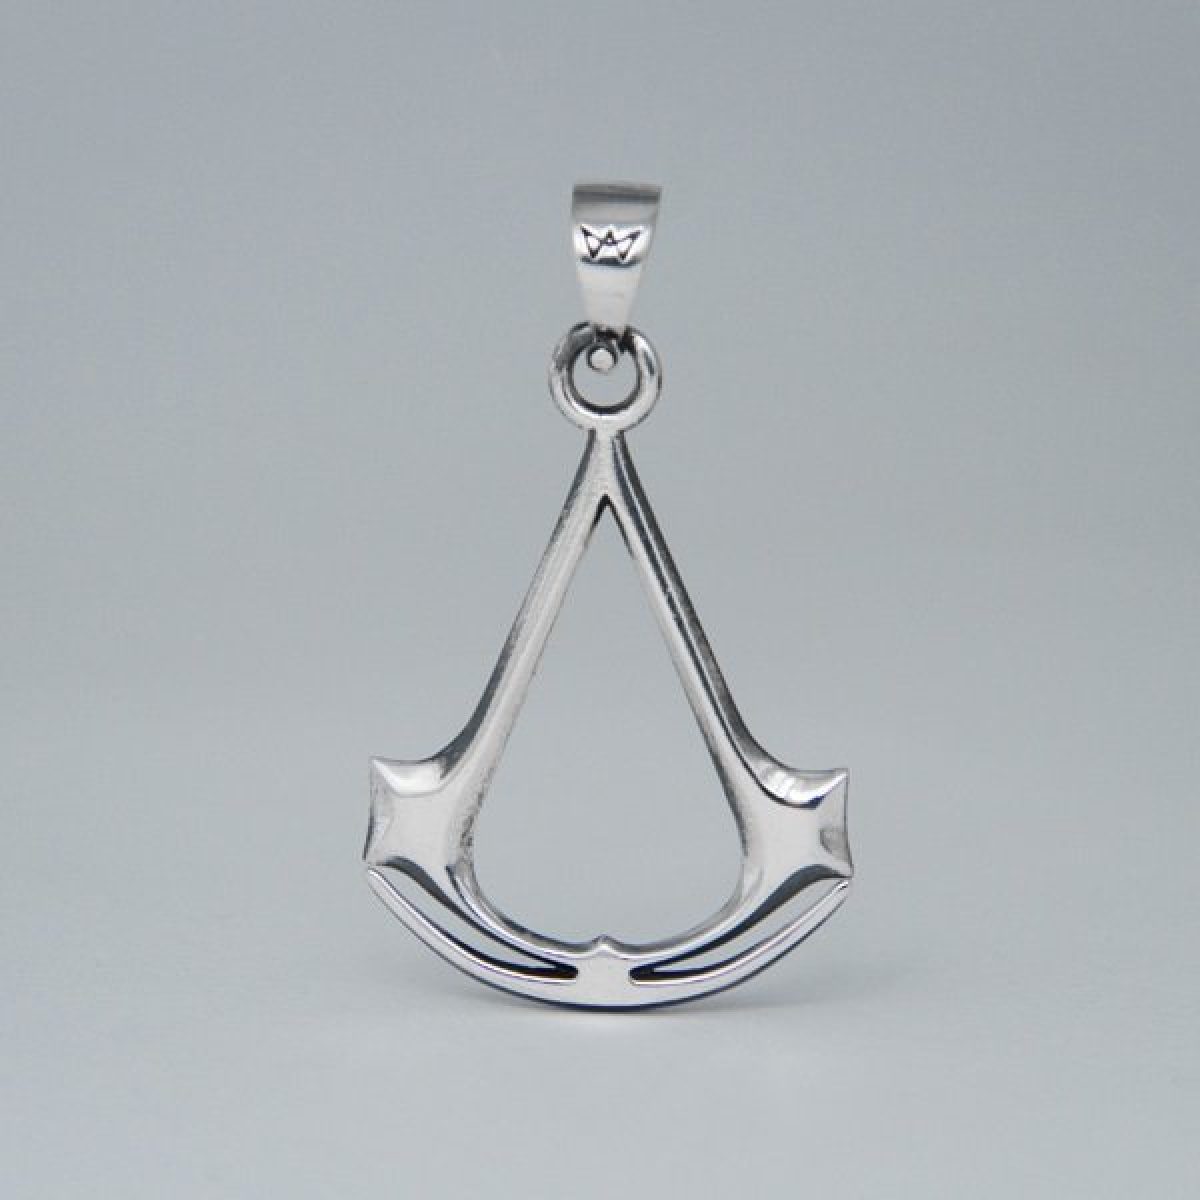 ASSASSIN'S CREED Crest 3D Keychain Silver ABYKEY105 